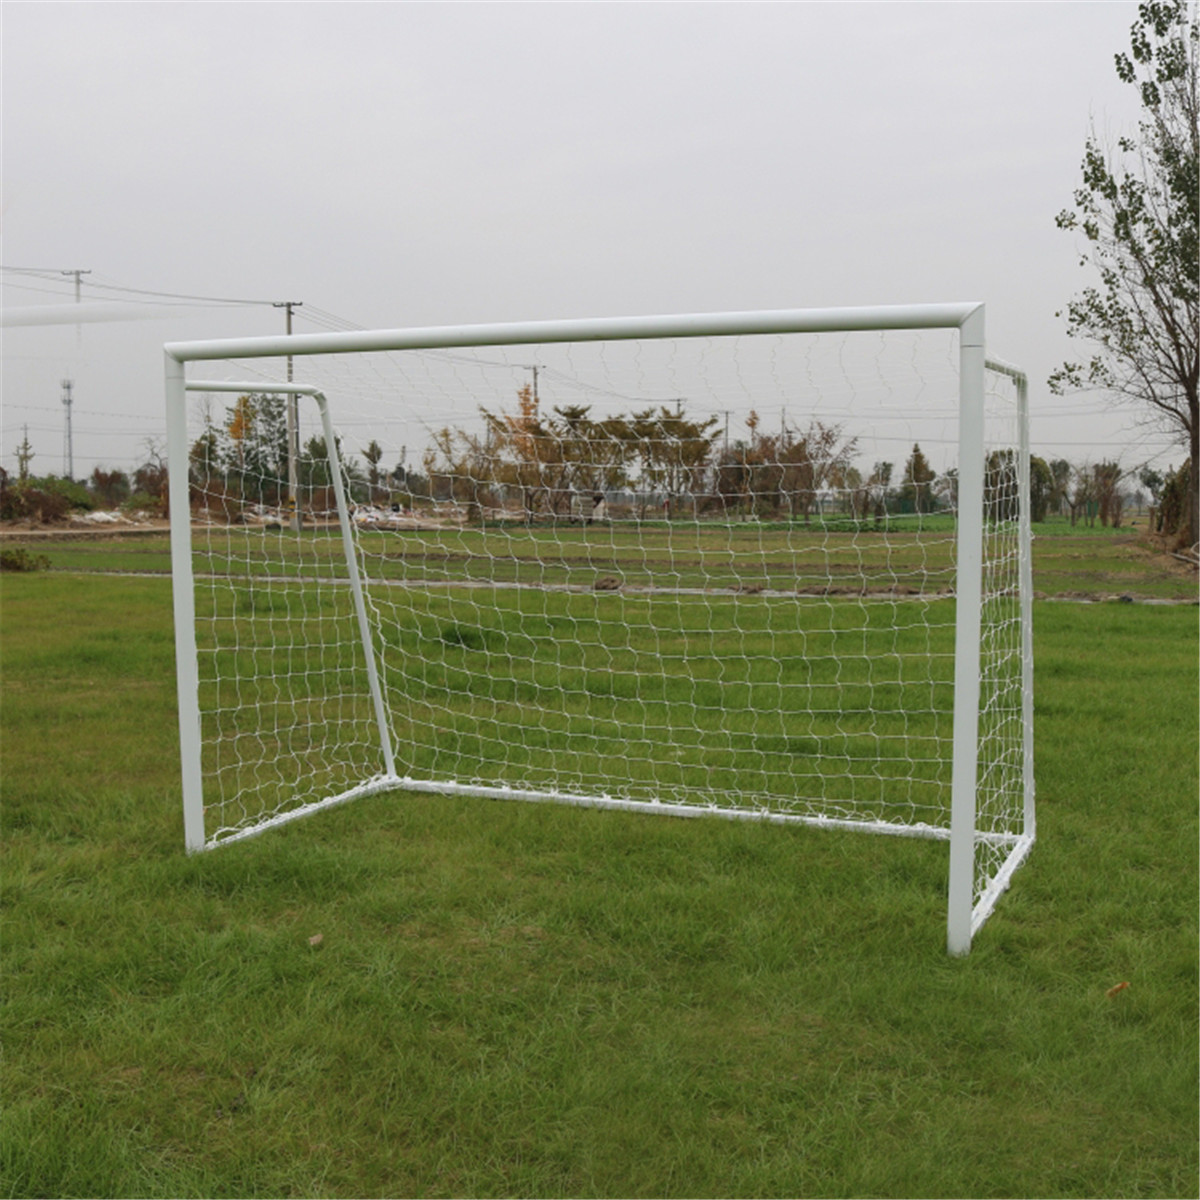 Football-Soccer-Goal-Post-Net-Training-Match-Replace-Outdoor-Full-Size-Adult-Kid-1249189-3